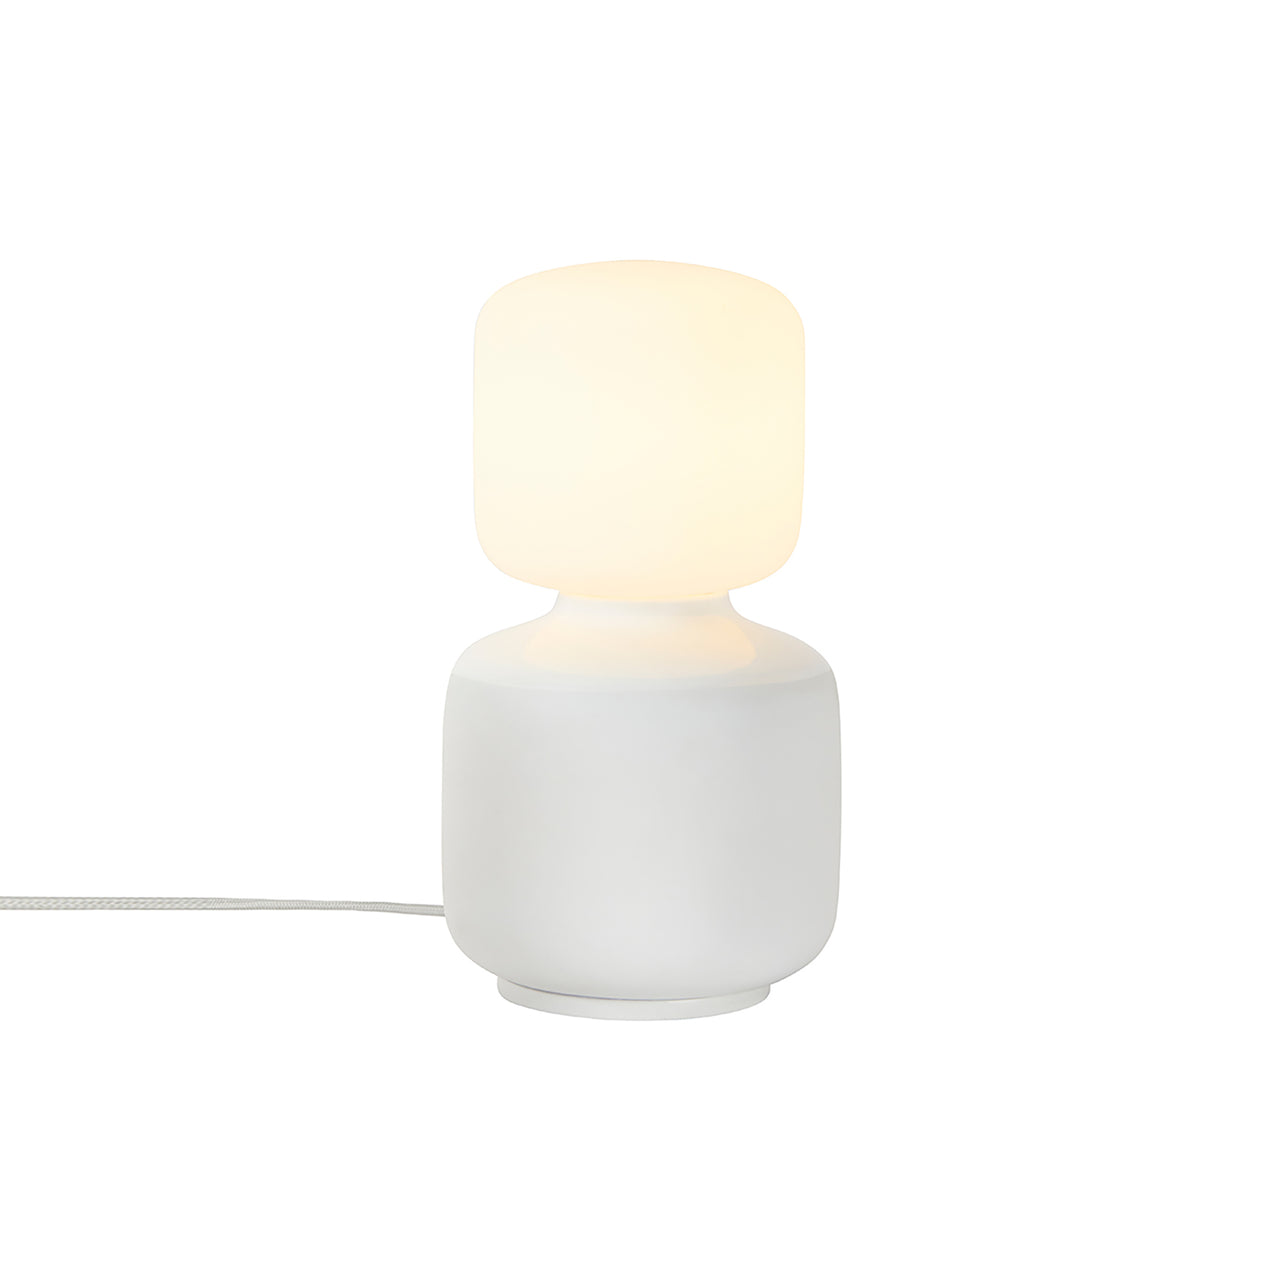 Reflection Table Lamp: Obla